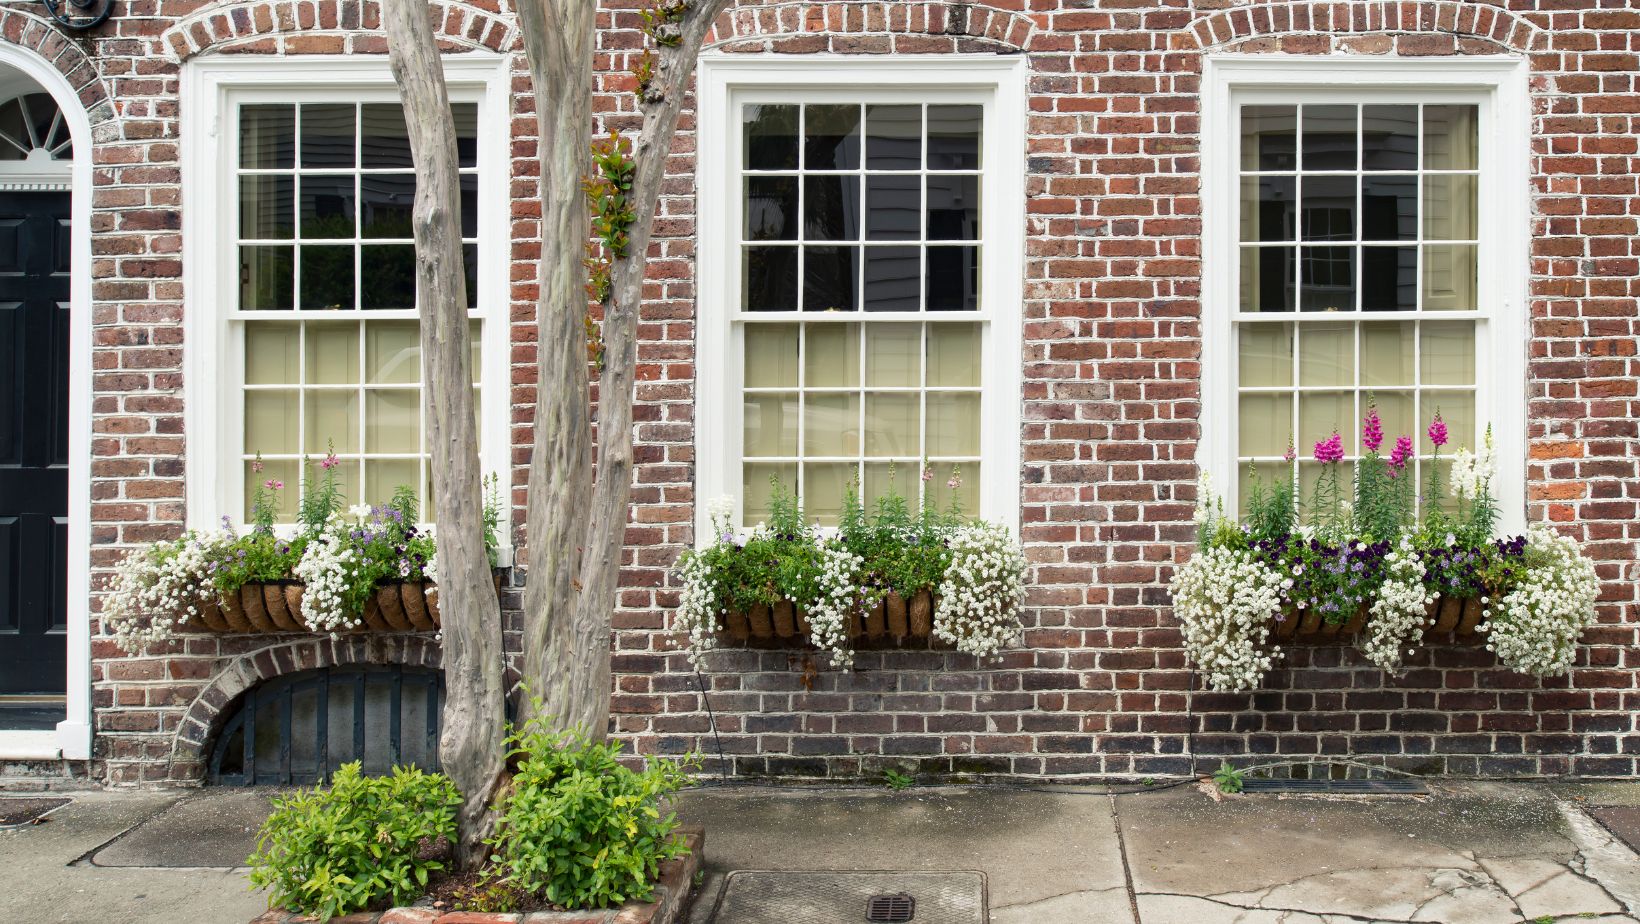 A row of white tall windows with flowers baskets on each one.